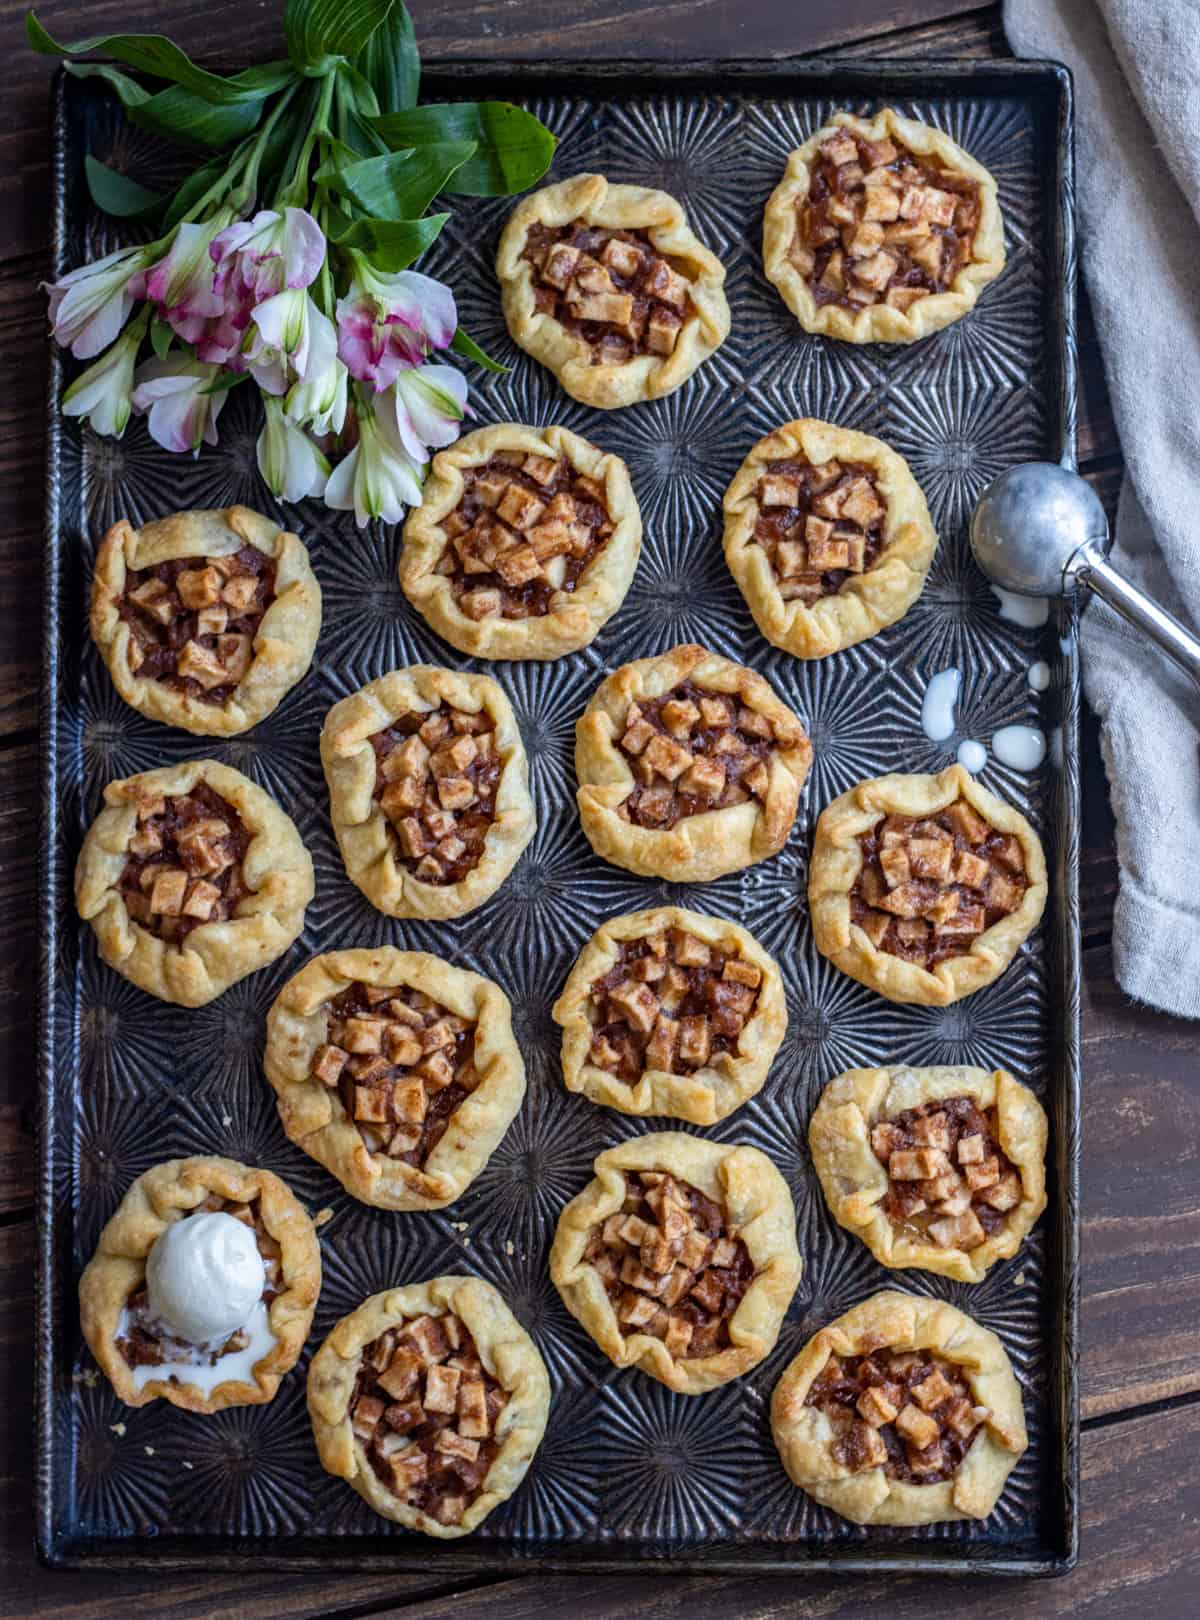 Mini apple galettes on a dark tray with a scoop of ice cream on one galette and flowers in the corner.